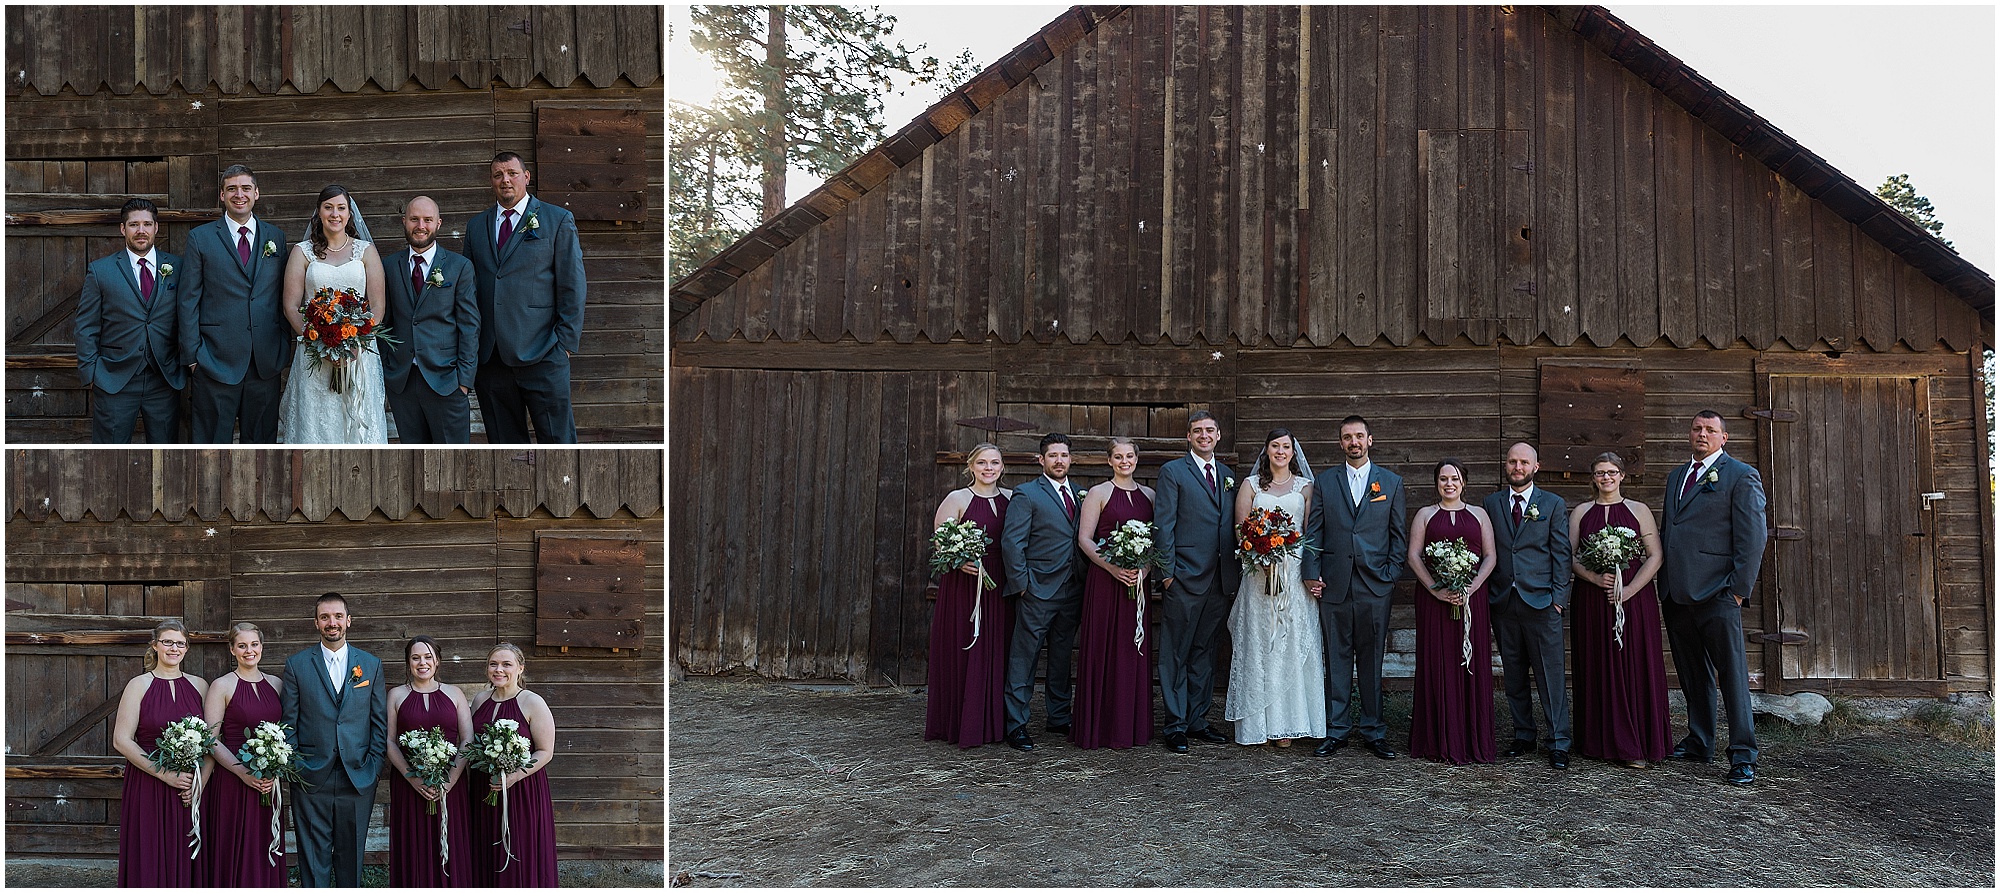 Wedding party portraits at the rustic barn in Hollinshead Park in Bend, OR. | Erica Swantek Photography